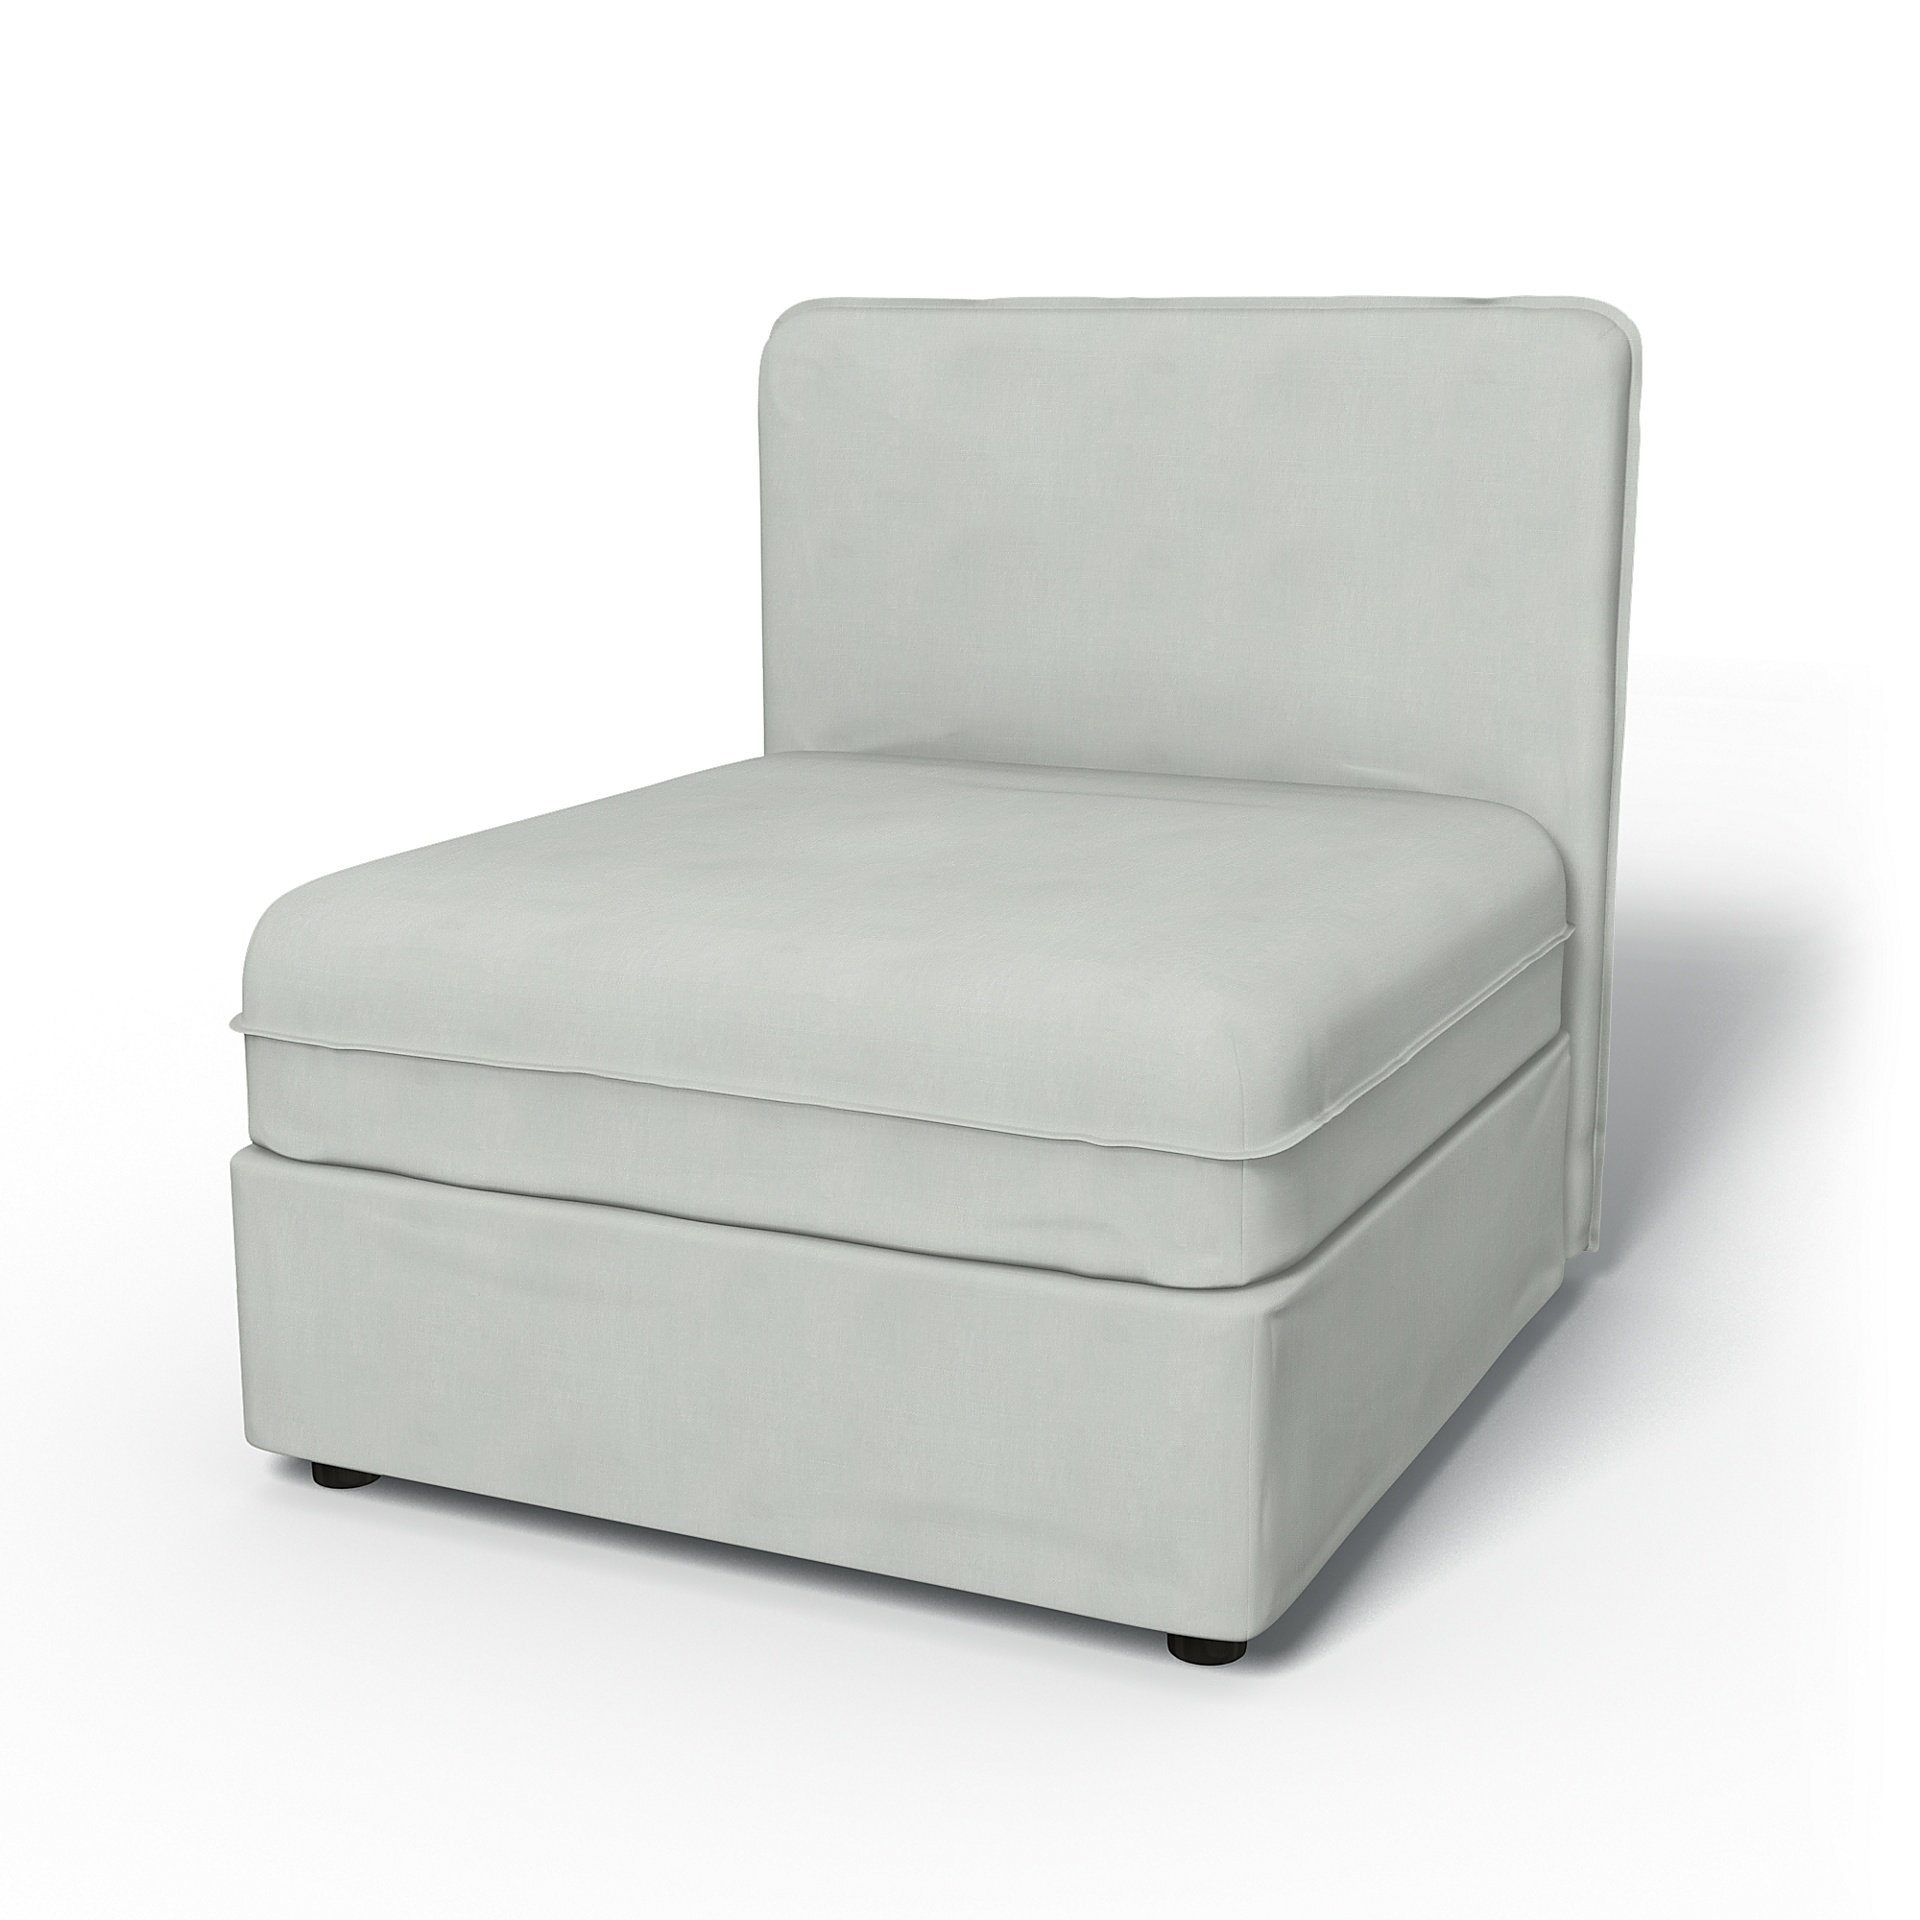 IKEA - Vallentuna Seat Module with Low Back Cover 80x80cm 32x32in, Silver Grey, Linen - Bemz